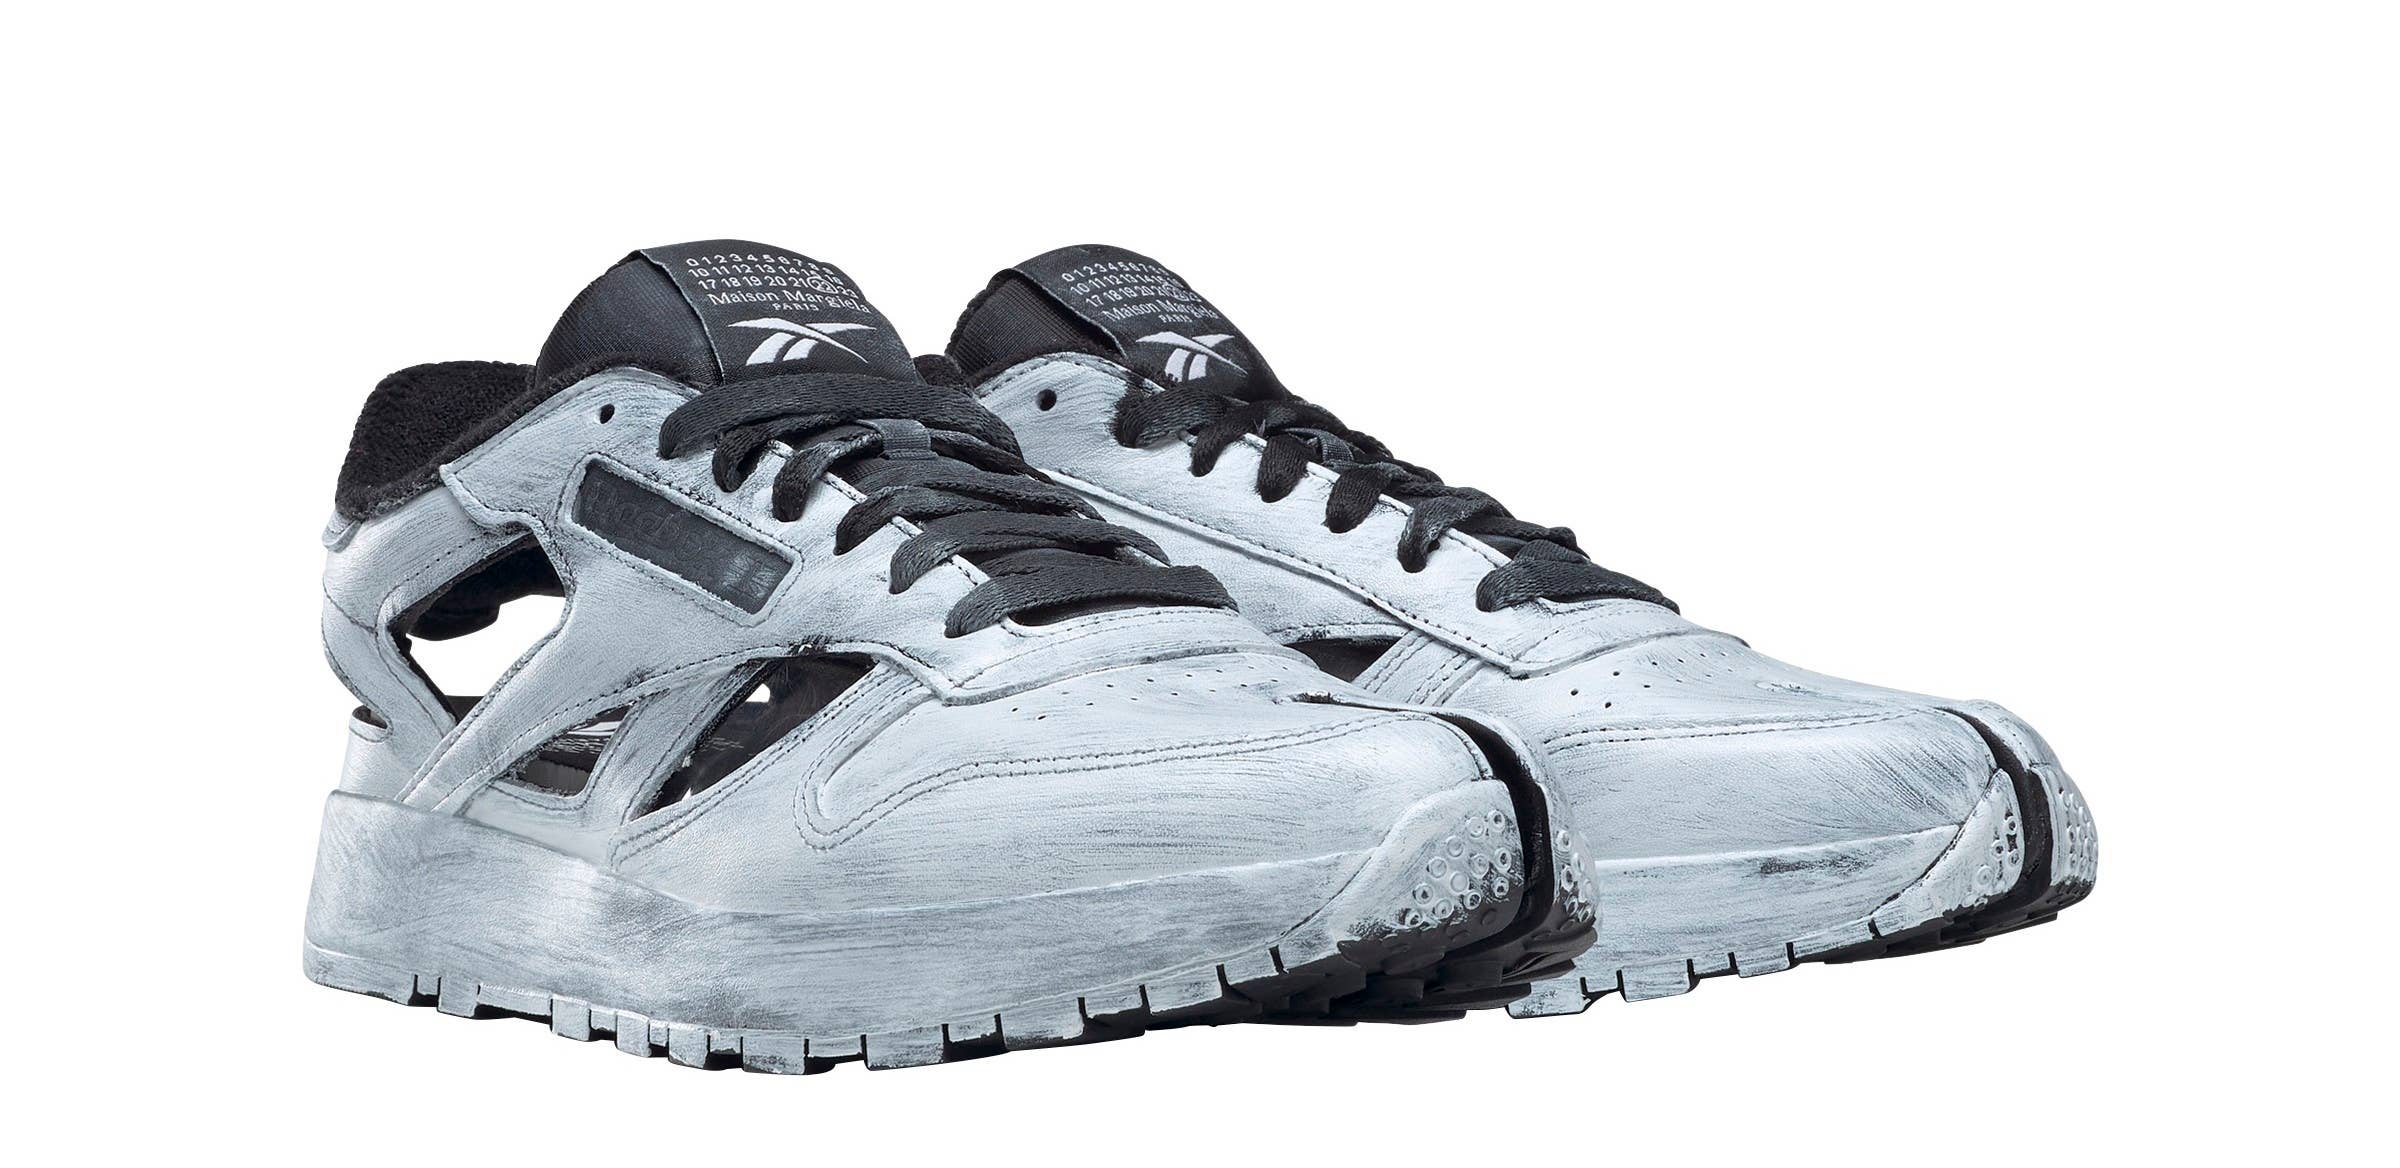 Maison Margiela x Reebok will take your trainer game to new heights